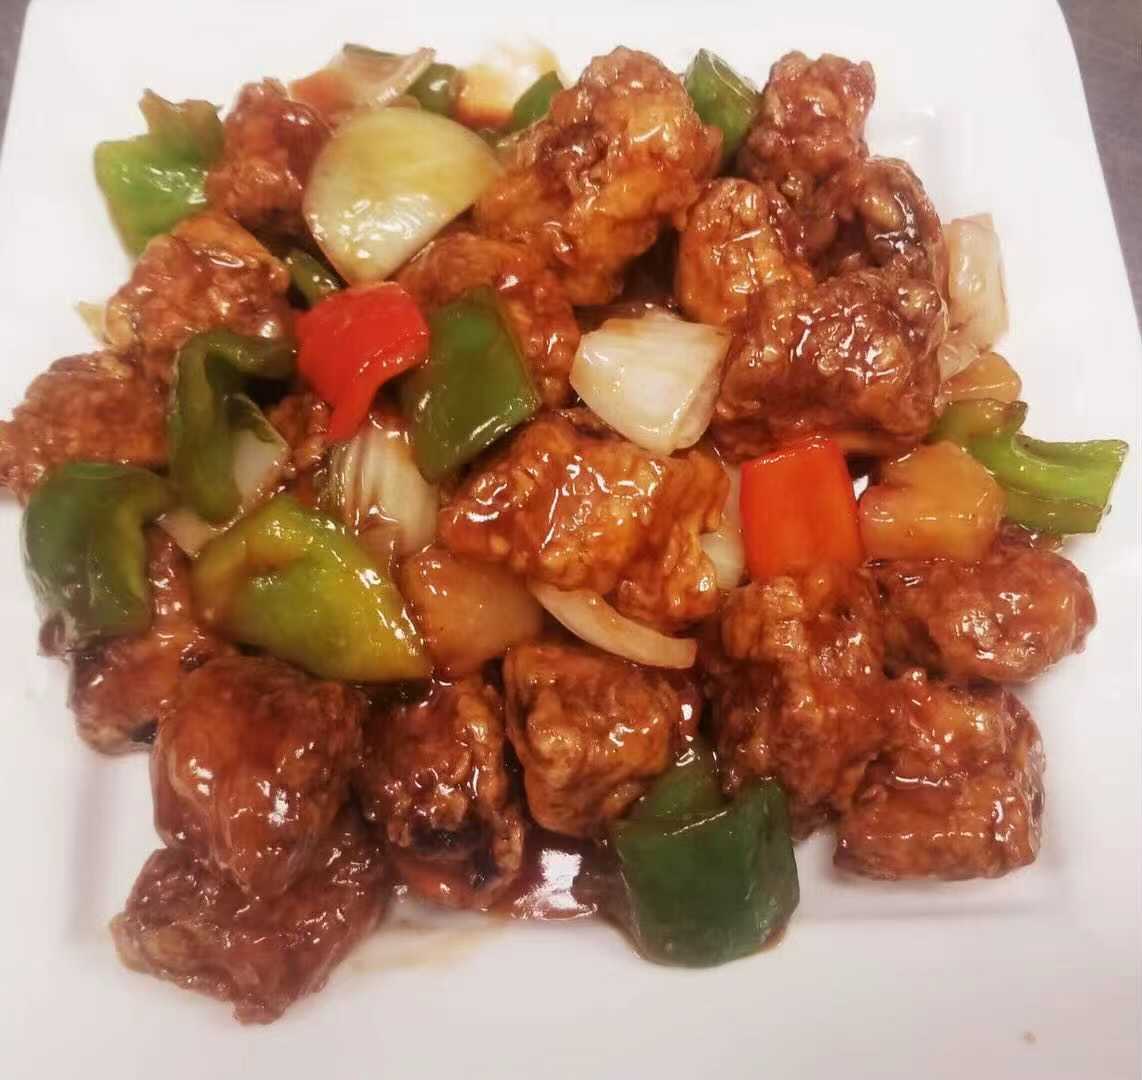 199. Sweet and Sour Country Spareribs (Cantonese Style)